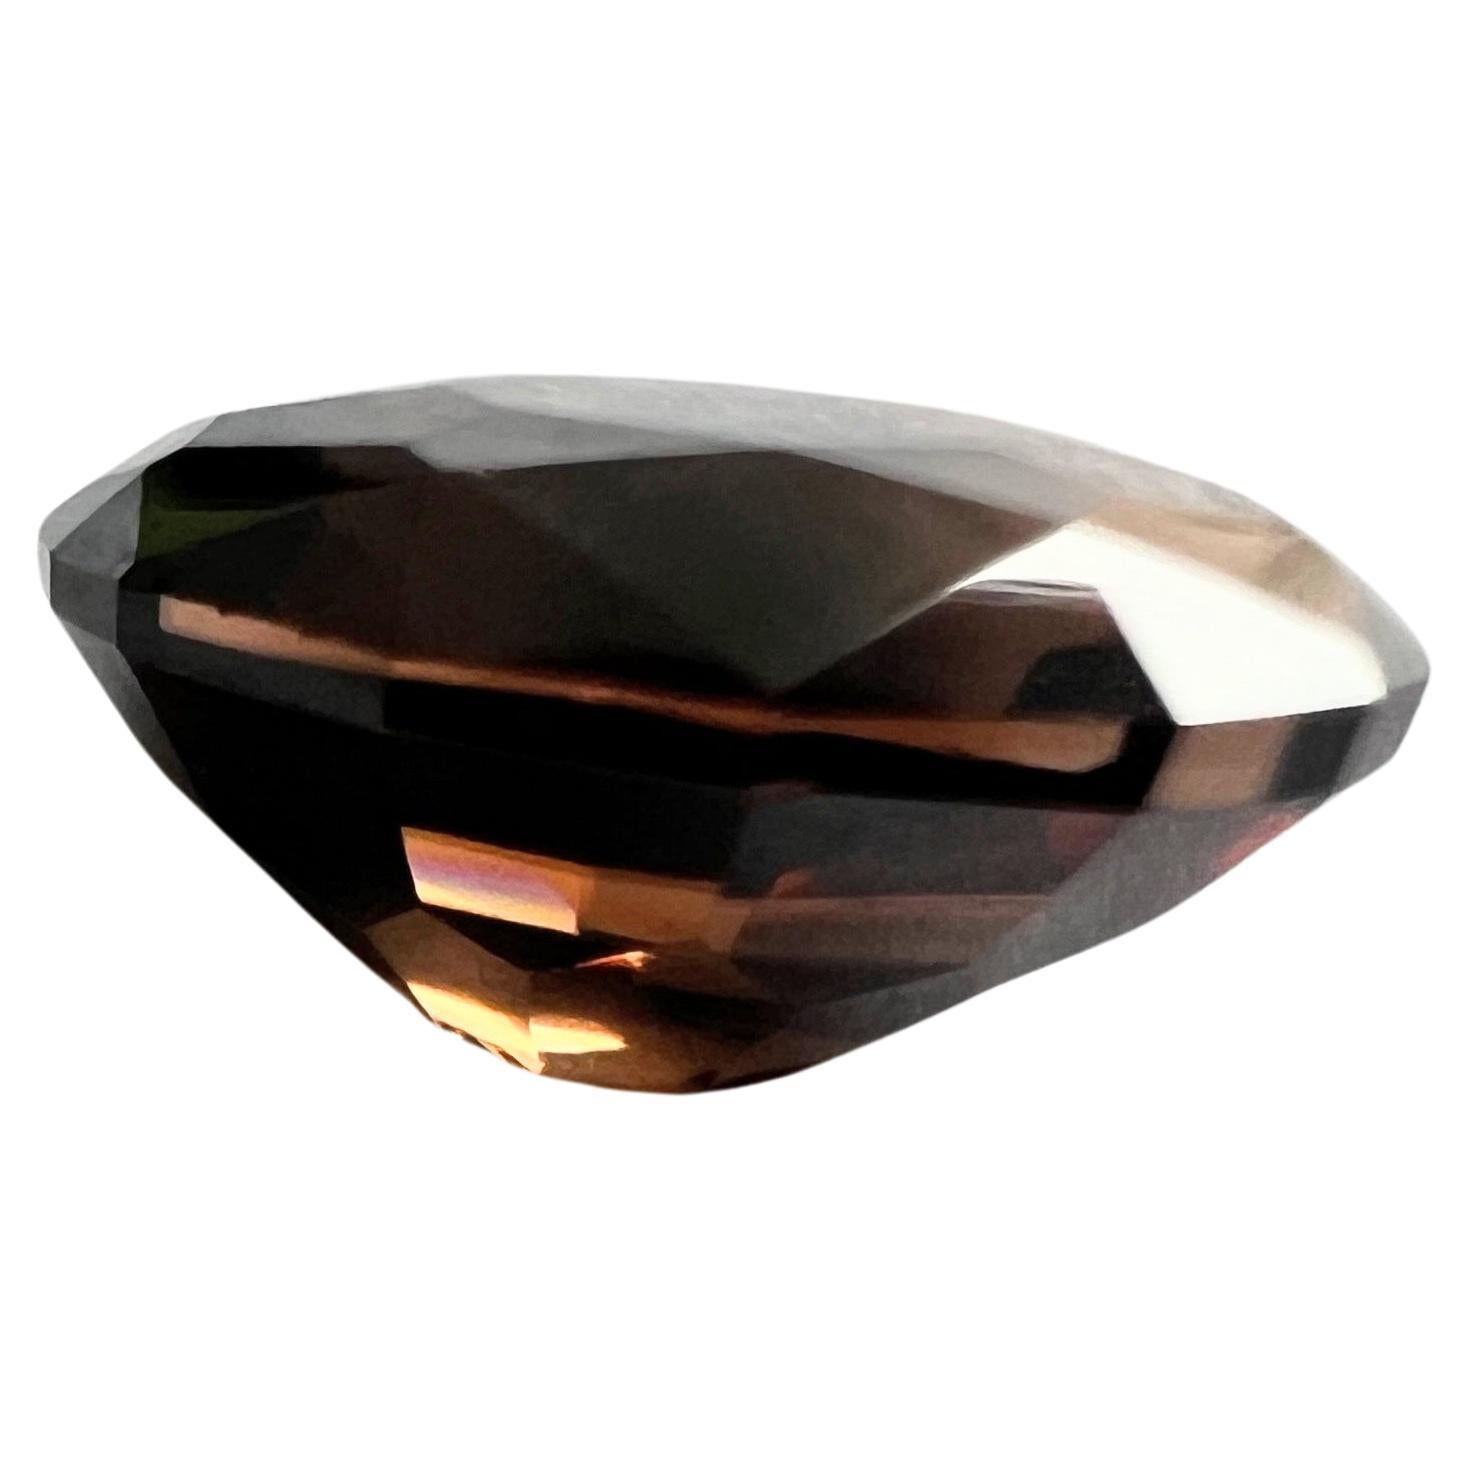 Oval Cut 2.40ct Oval Natural Zircon Gemstone For Sale